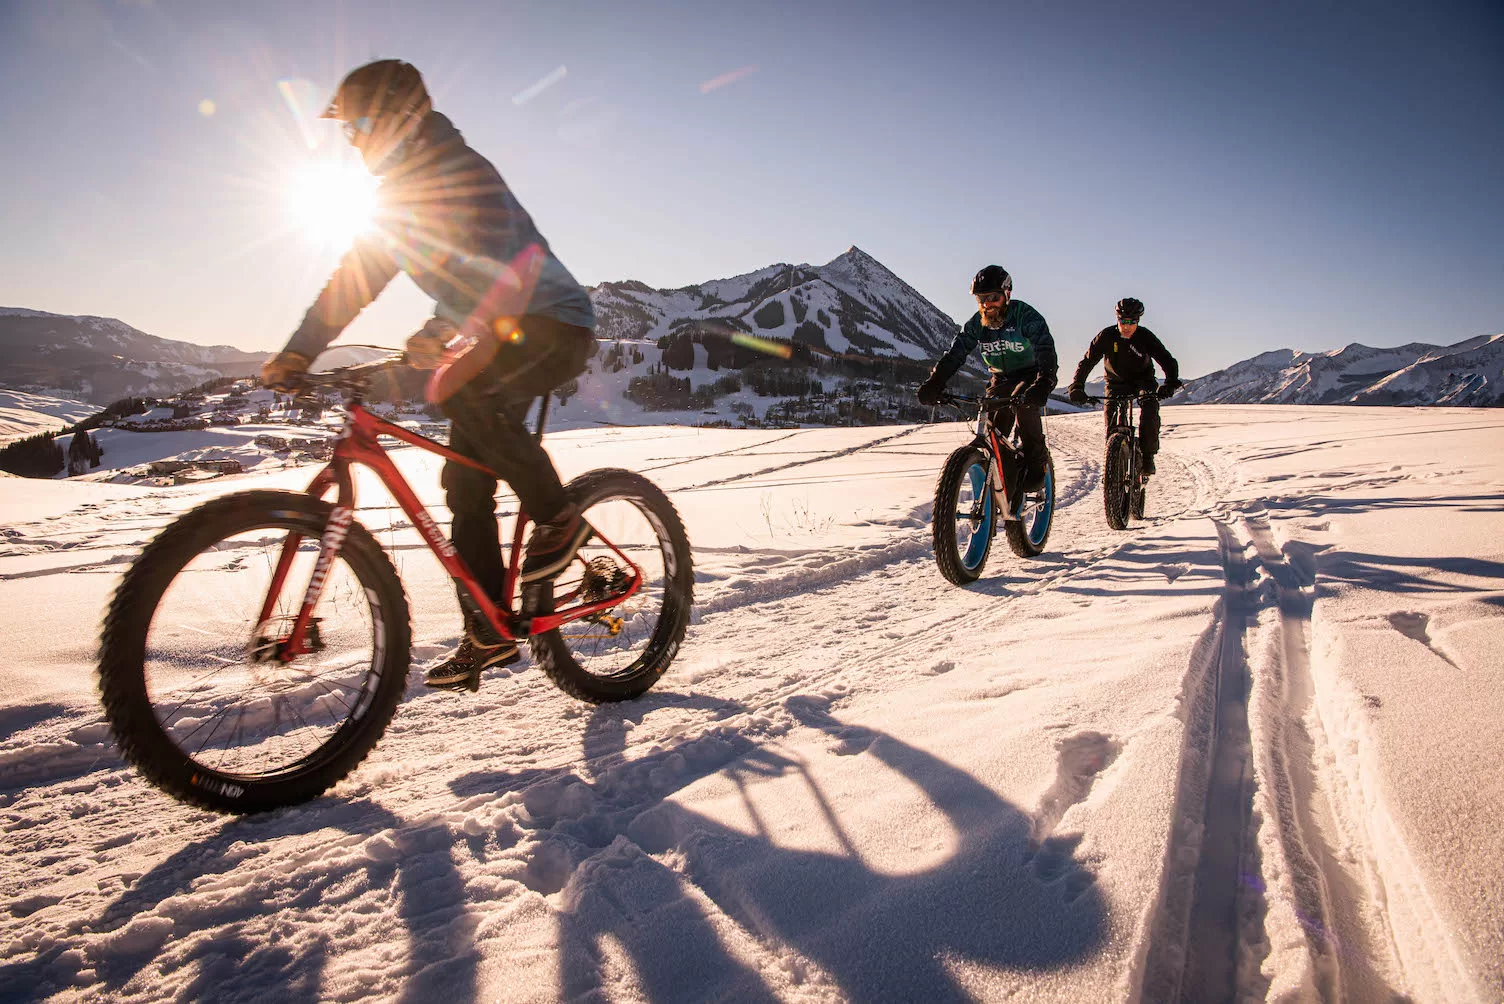 Three fat bikers ride a groomed track. The bikes have wide tires. There is a mountain peak in the background